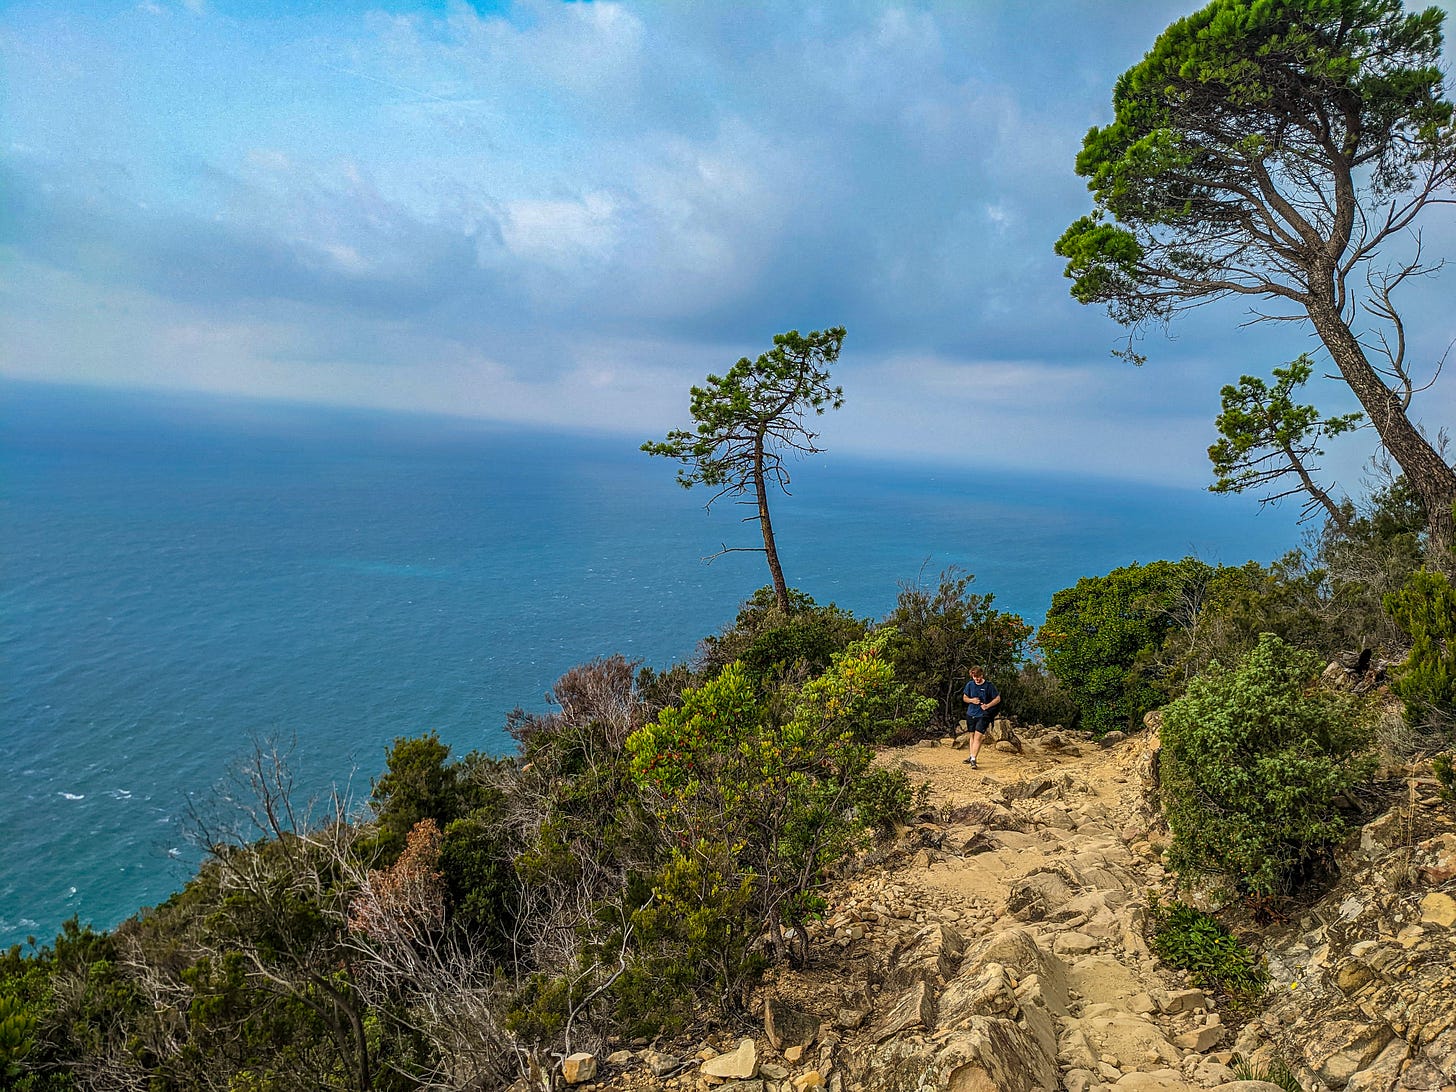 Halfway between Vernazza and Corniglia is this sweeping view of the Ligurian Sea, trees and bushes in the foreground. 